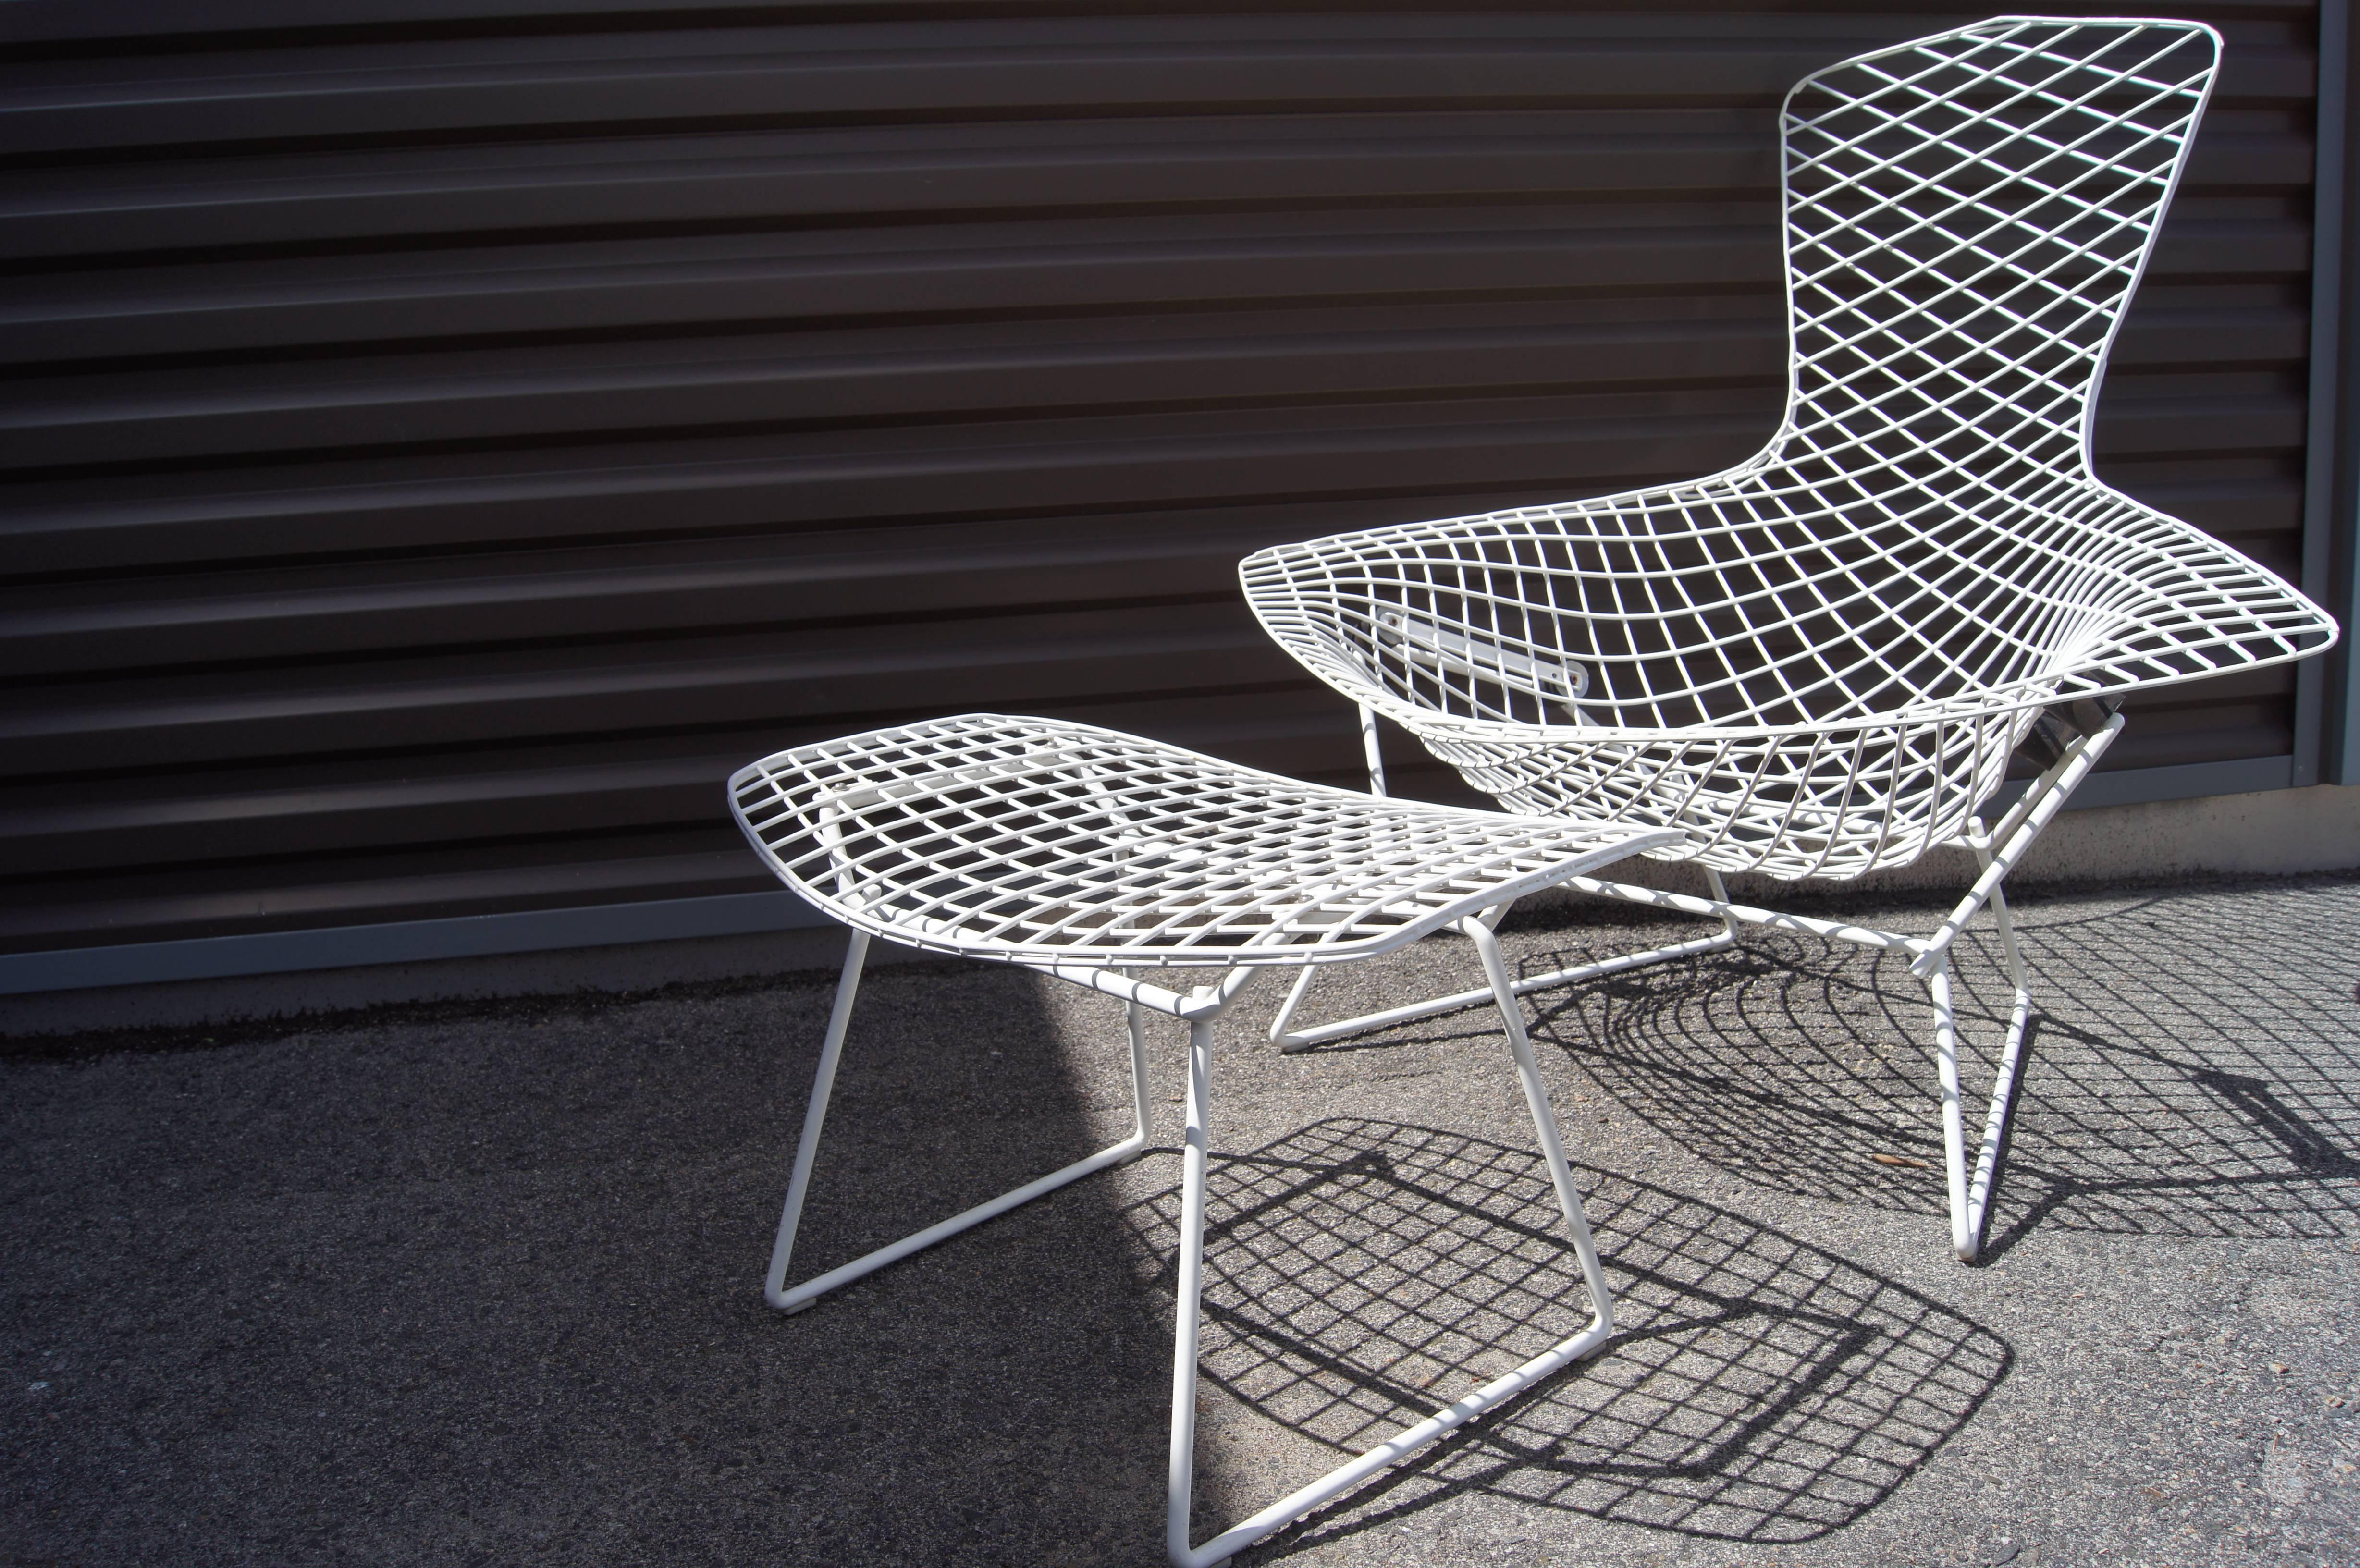 Part of Harry Bertoia's 1952 collection of sculptural wire furniture for Knoll, the fanciful Bird Chair features a low seat, a high back, and wide armrests. A durable white finish coats the steel frame. The matching ottoman is 23 in. W x 17.25 in. D